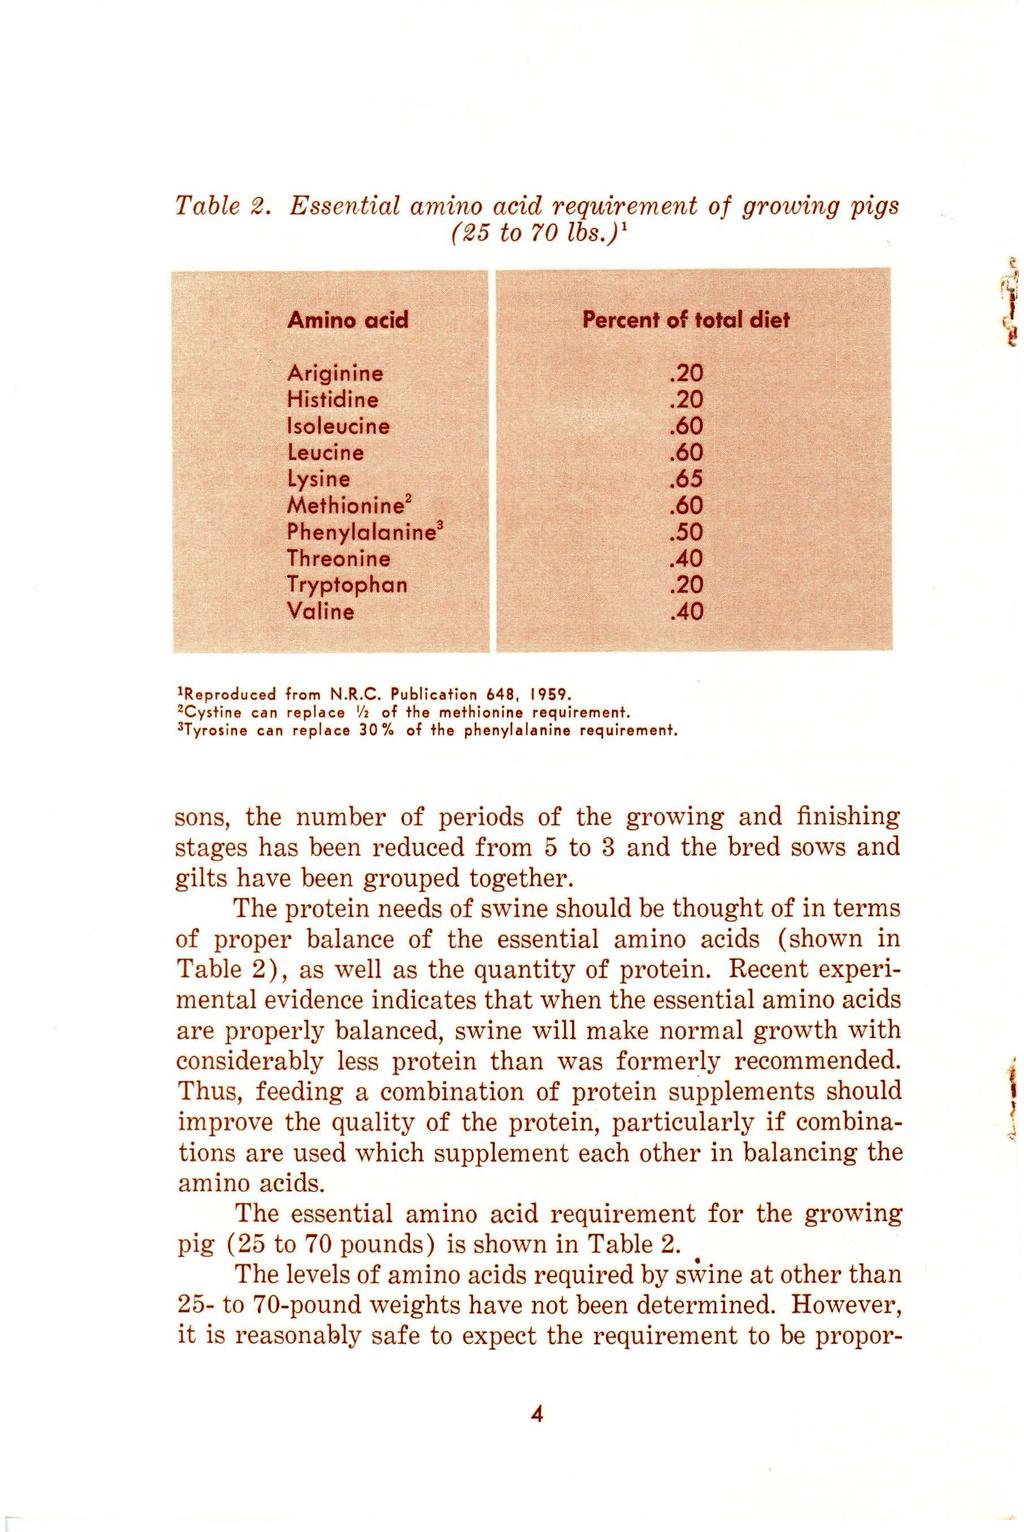 Table 2. Essential amino acid requirement of growing pigs (25 to 70 lbs.